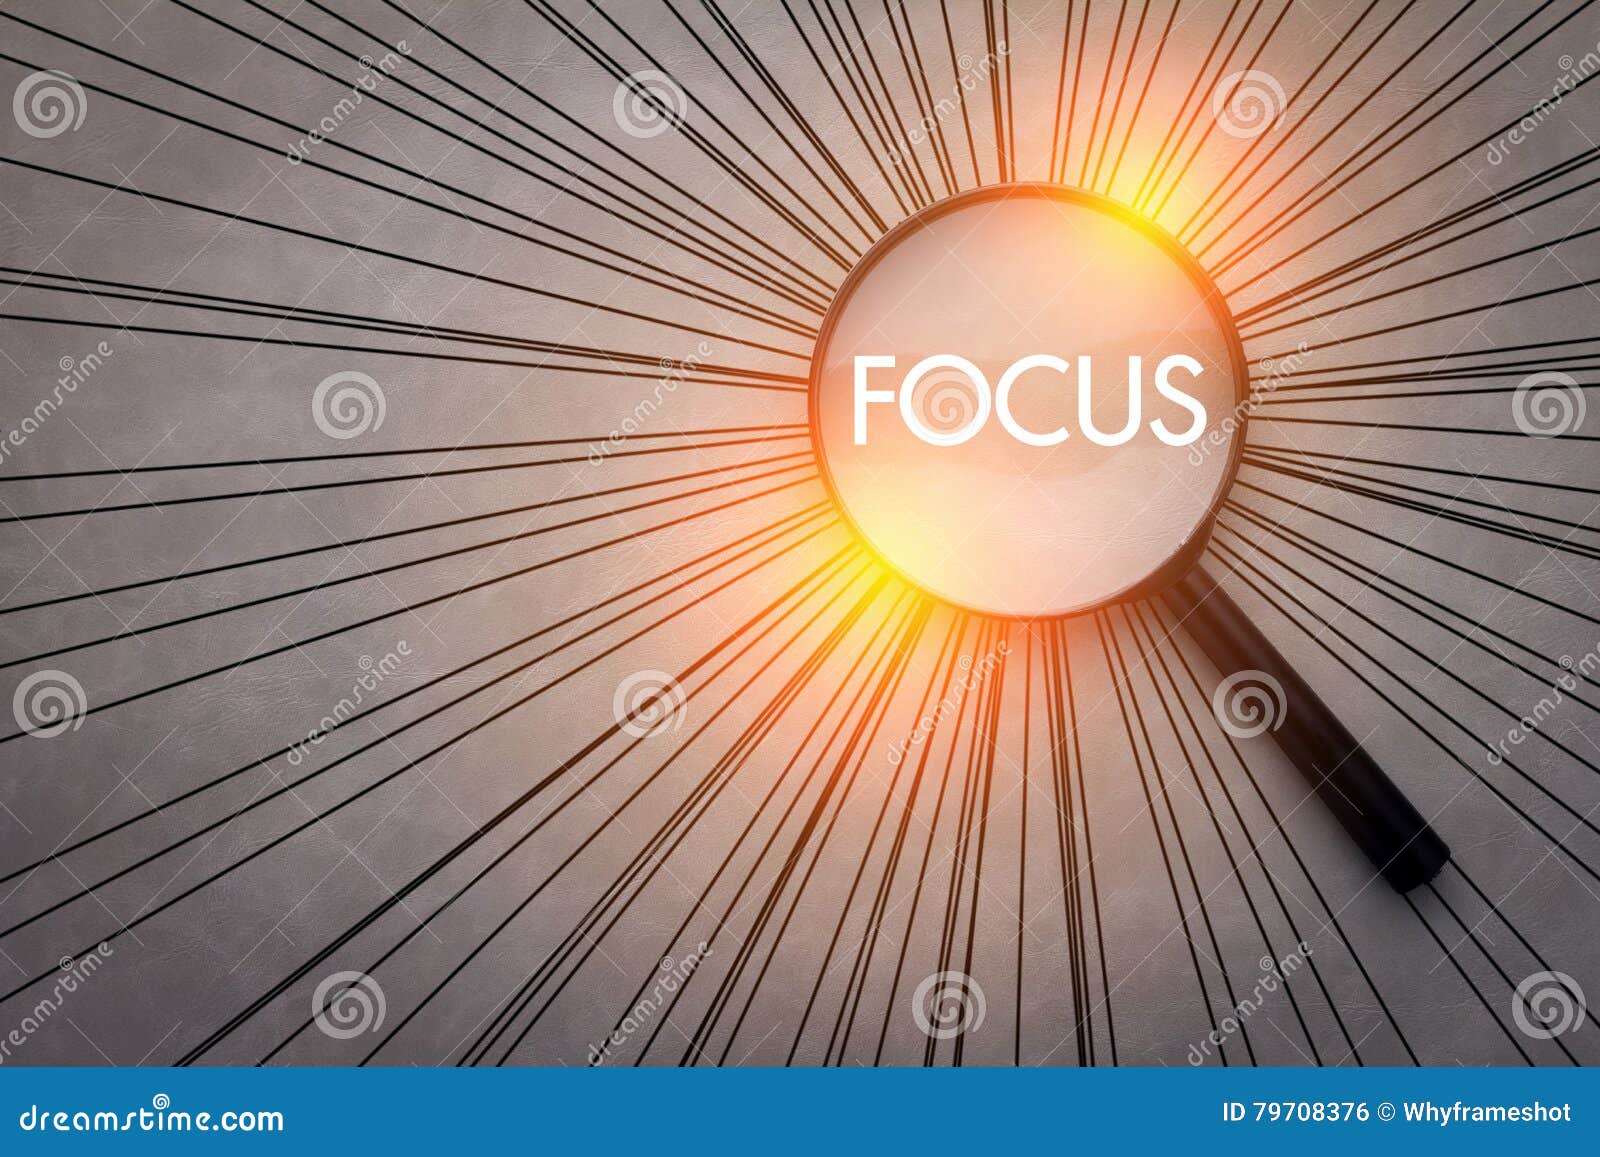 focus concept with magnifying glass